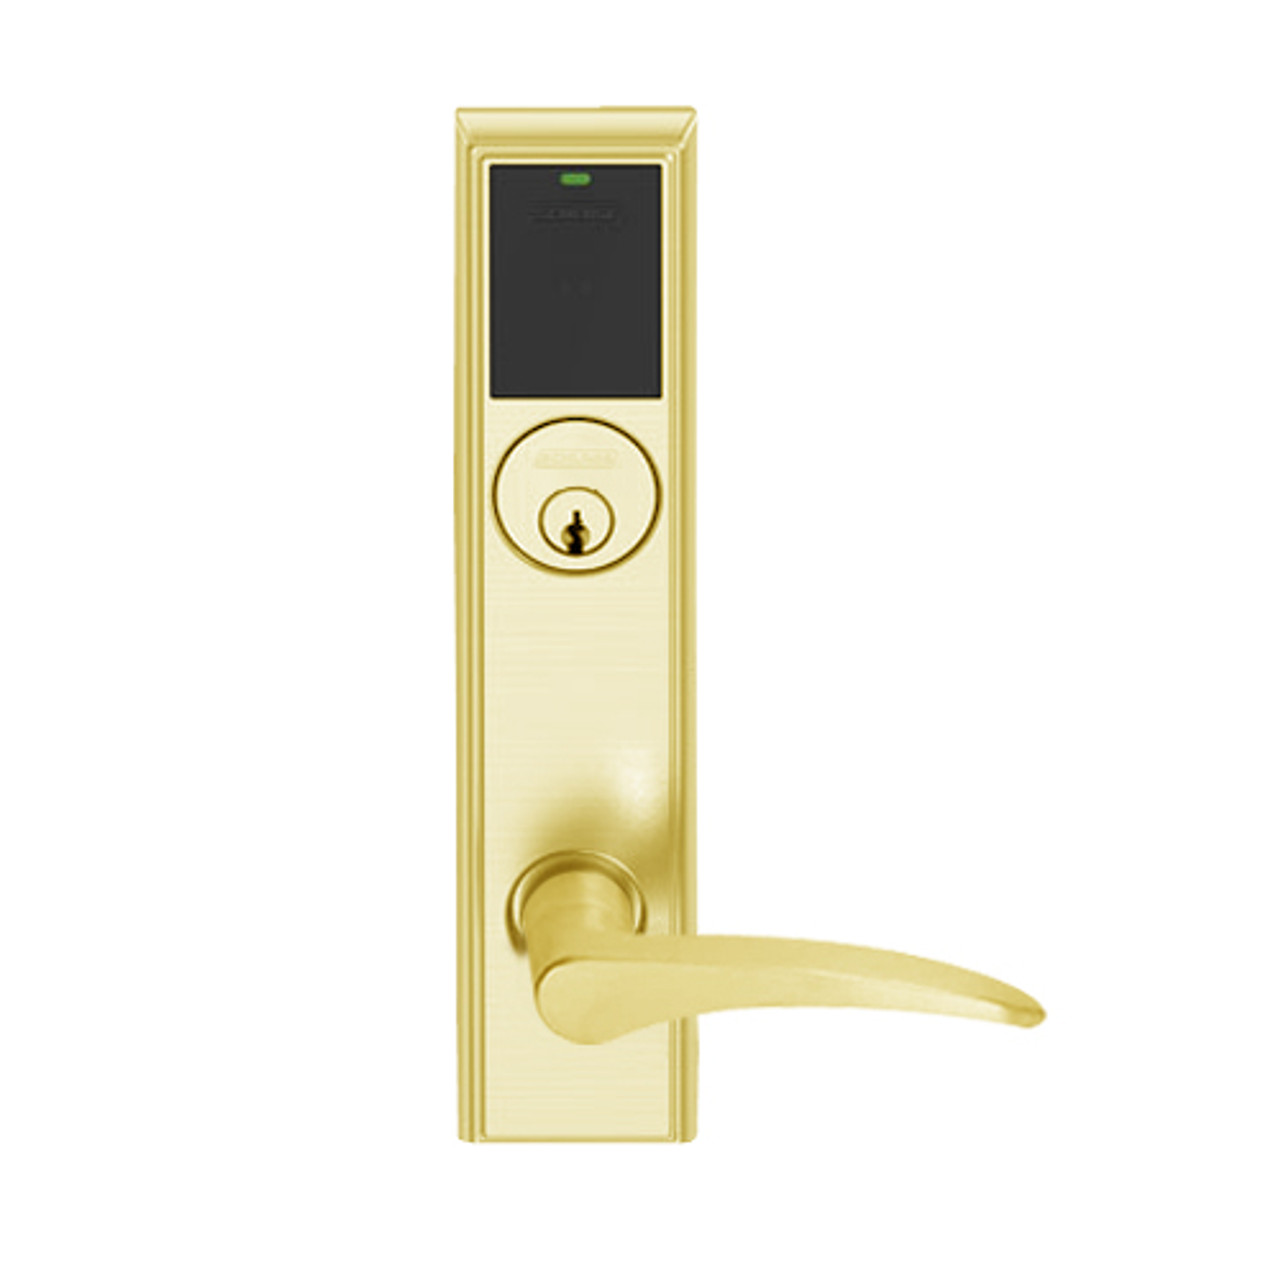 LEMB-ADD-P-12-605-RH Schlage Privacy/Office Wireless Addison Mortise Lock with Push Button, LED and 12 Lever in Bright Brass